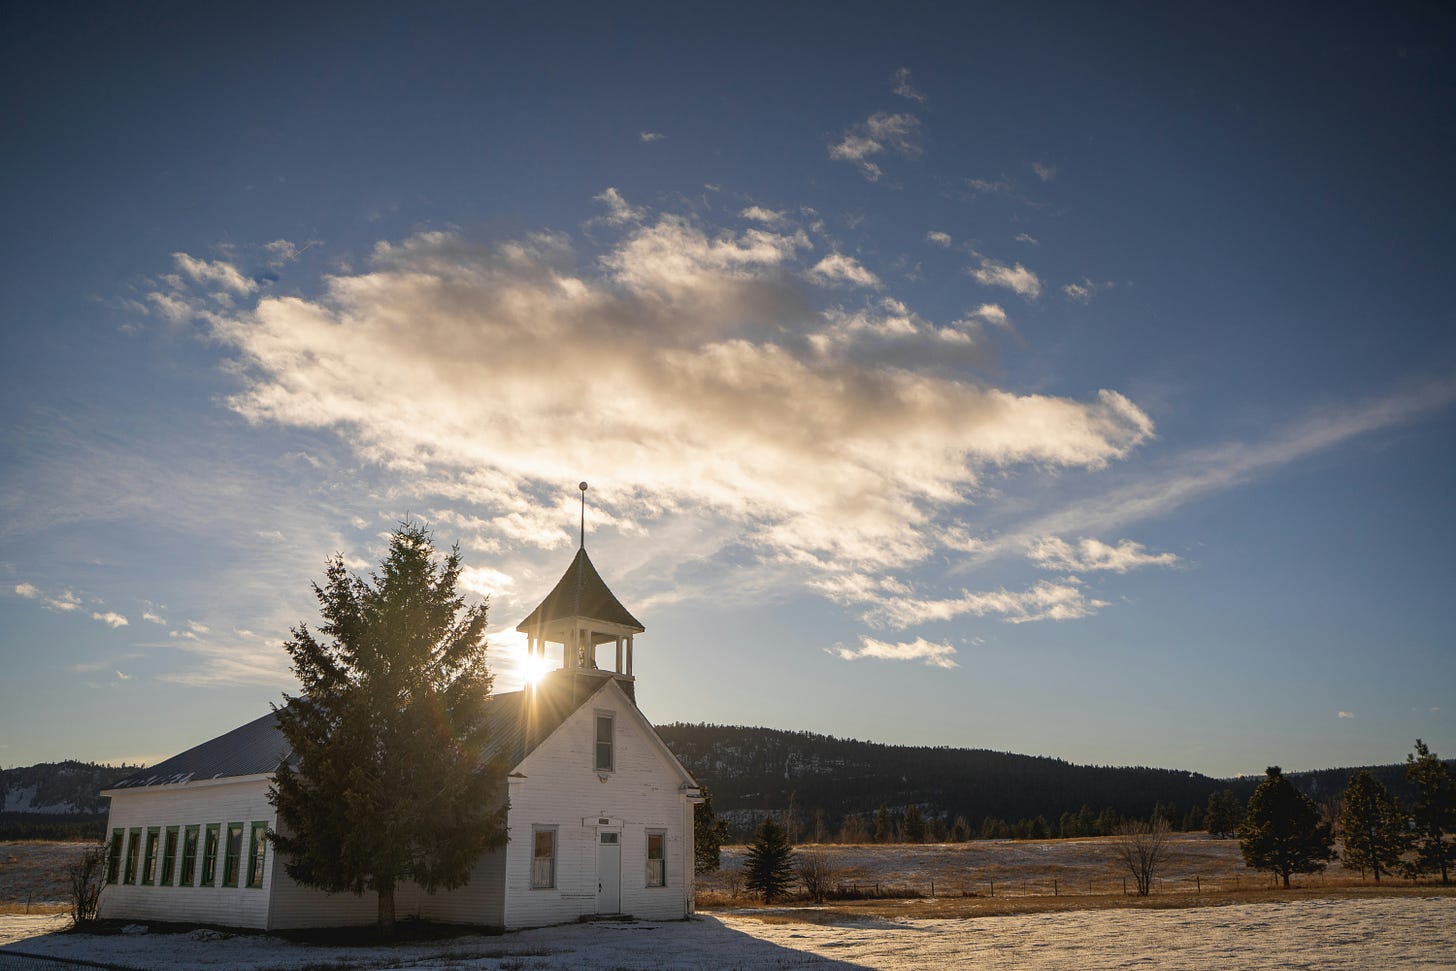 Image of rural church with sun shining from behind through steeple.